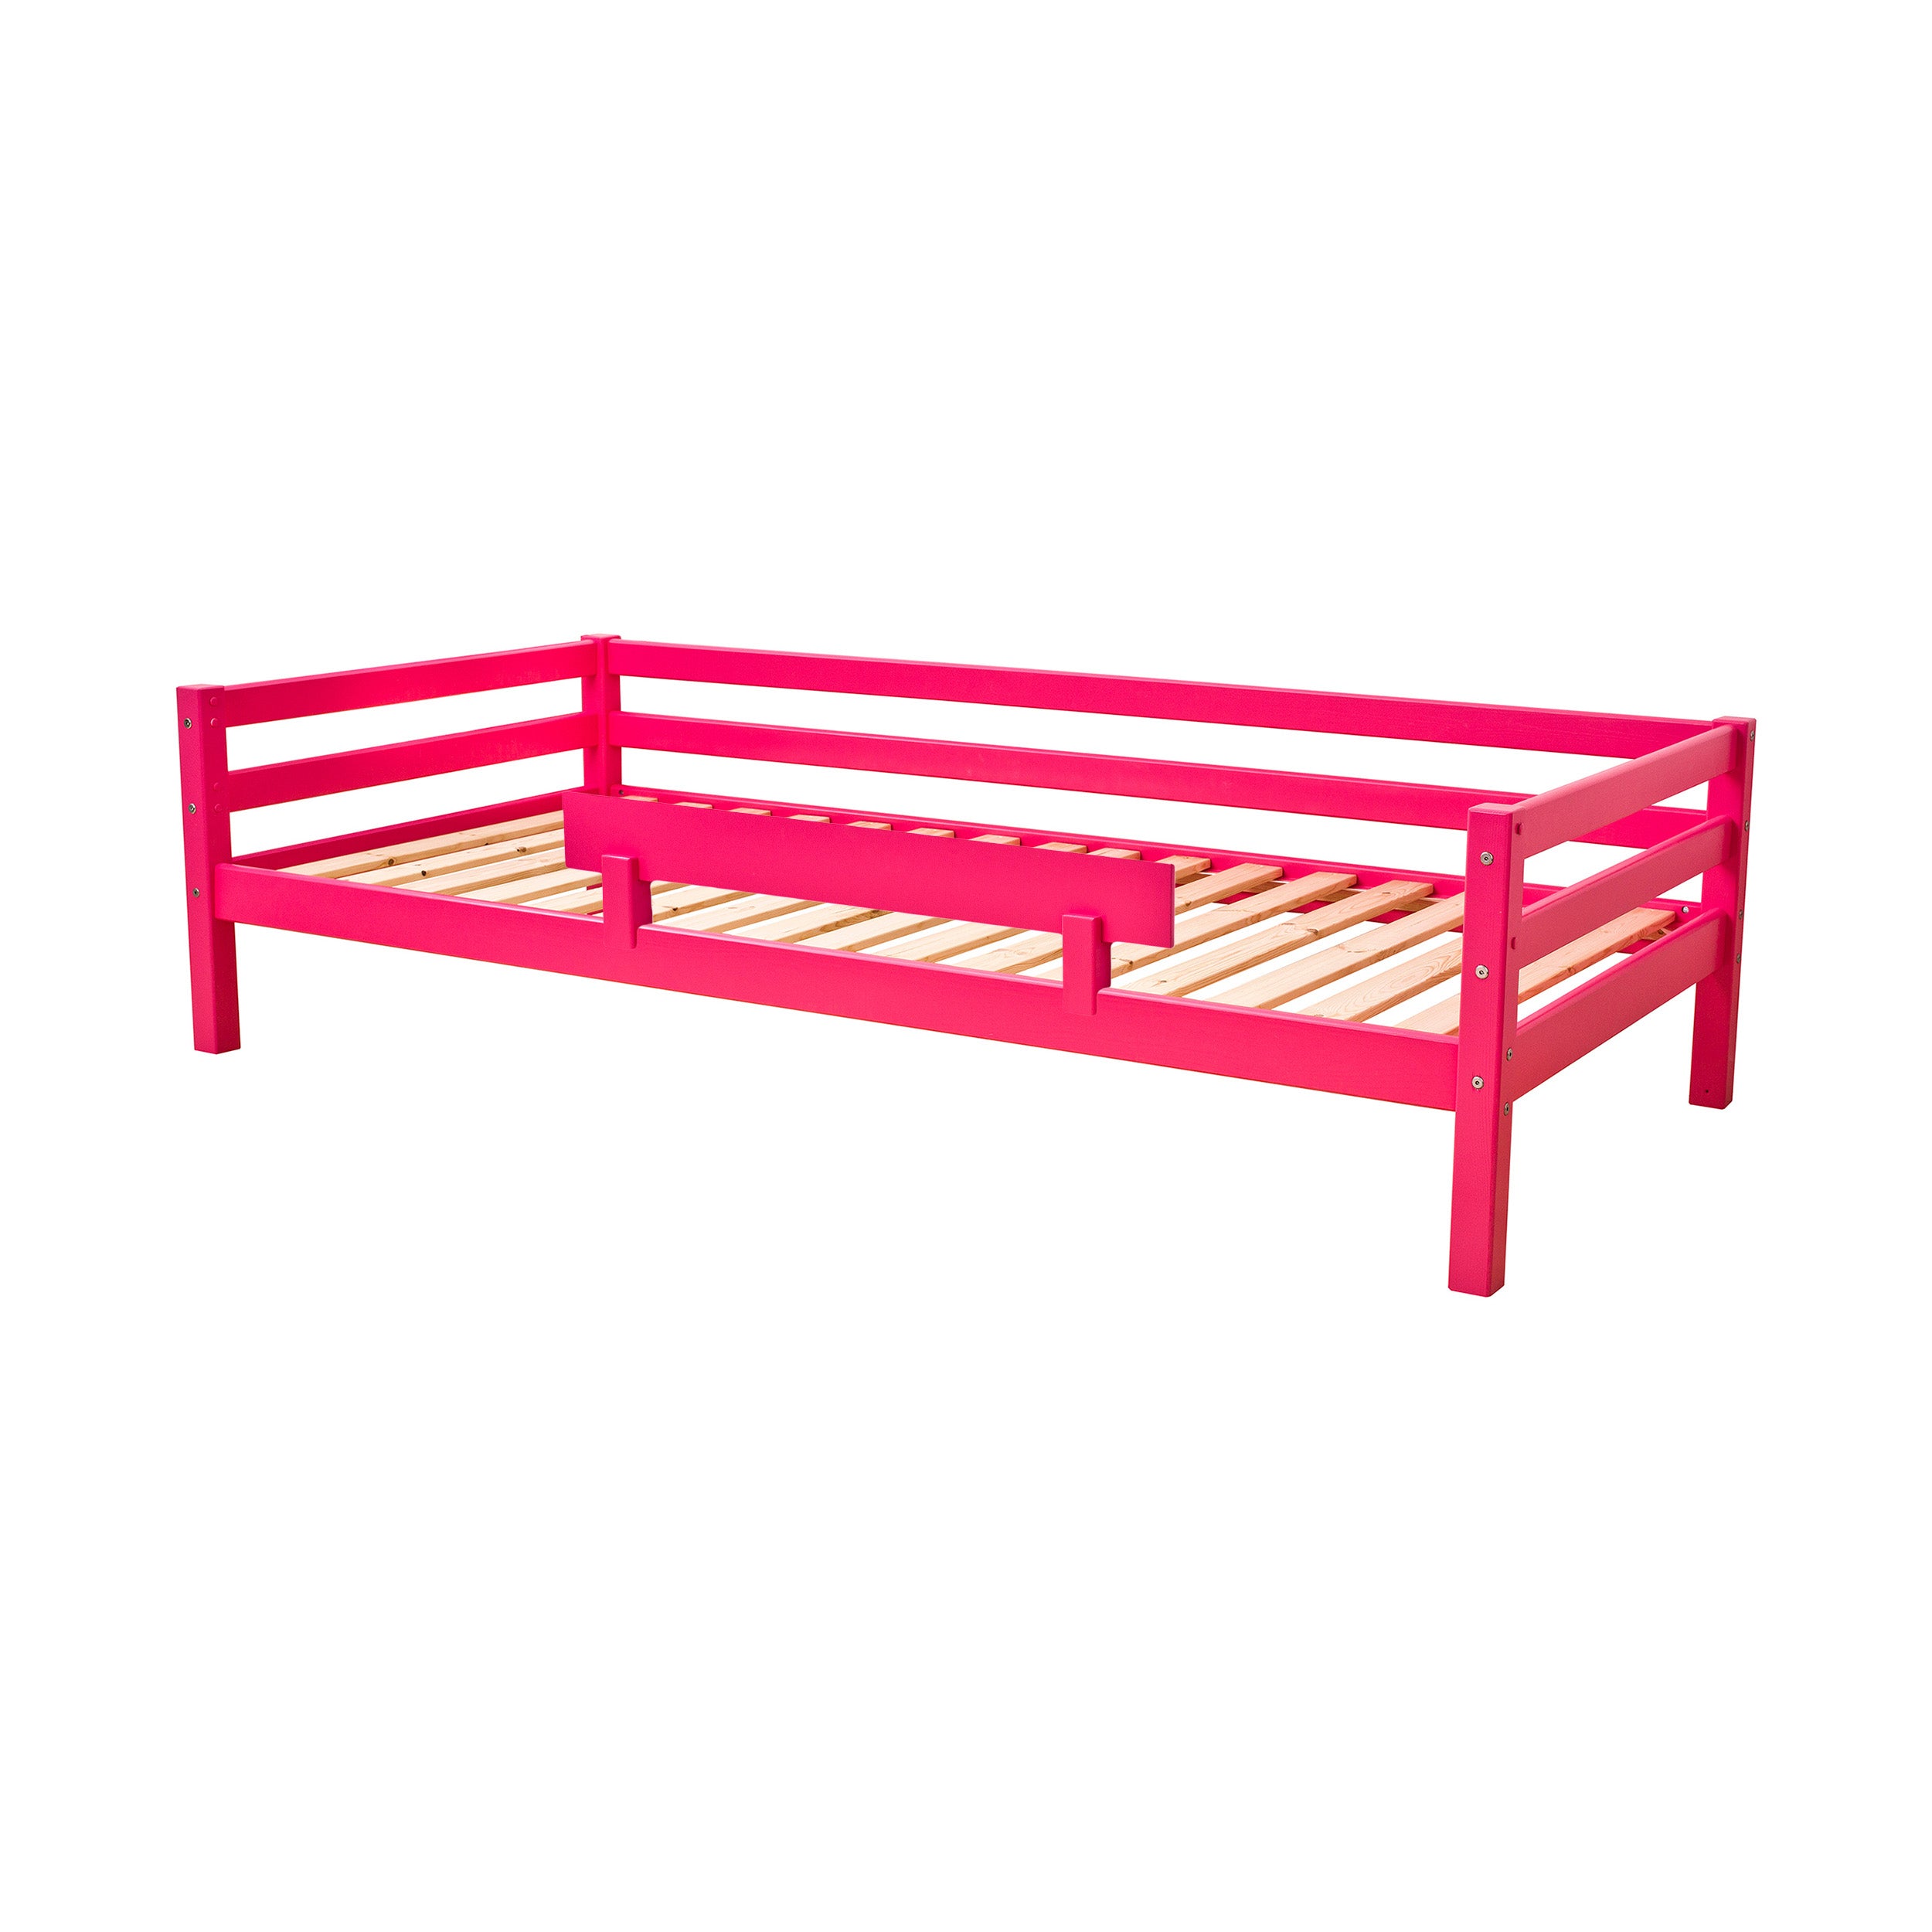 Outlet: ECO Dream junior bed 90x200 with safety rail, Pink